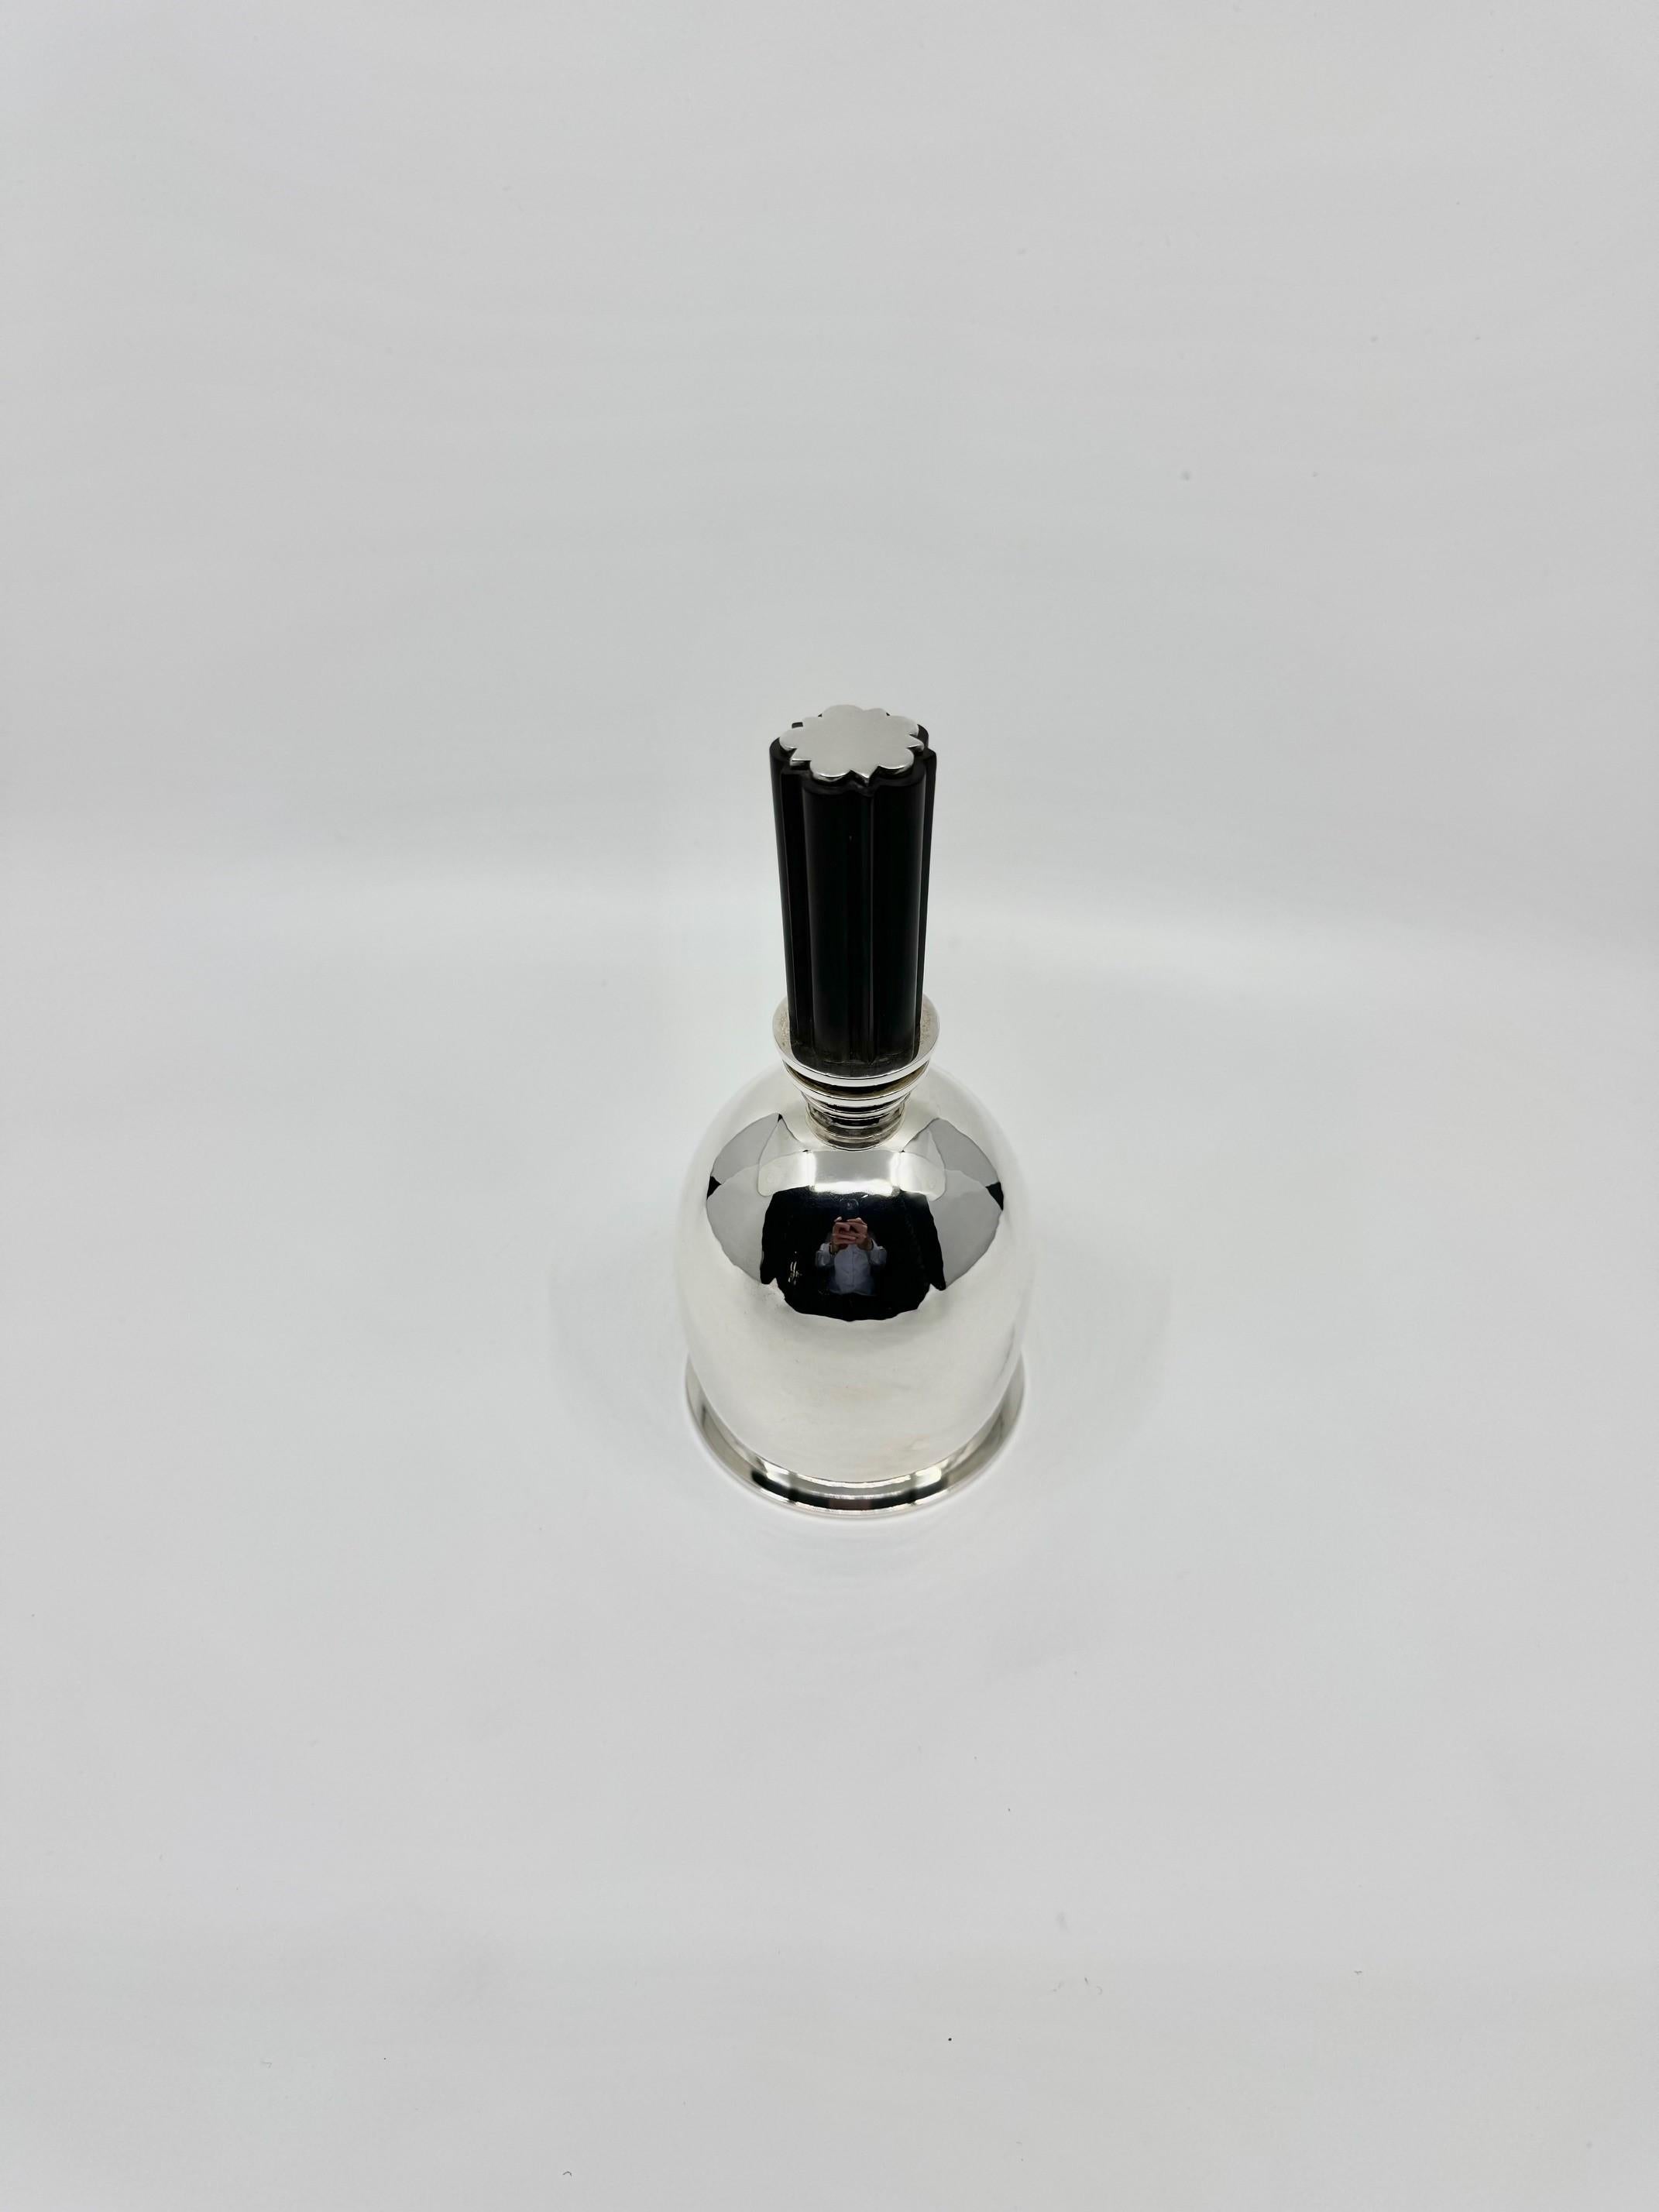 An Art Deco sterling silver chairman's bell with an ebony handle, design #729 by Harald Nielsen, circa 1934. This bell features an extra-large, domed design, notable for its unusually thick and heavy quality. The base consists of a ring attached to